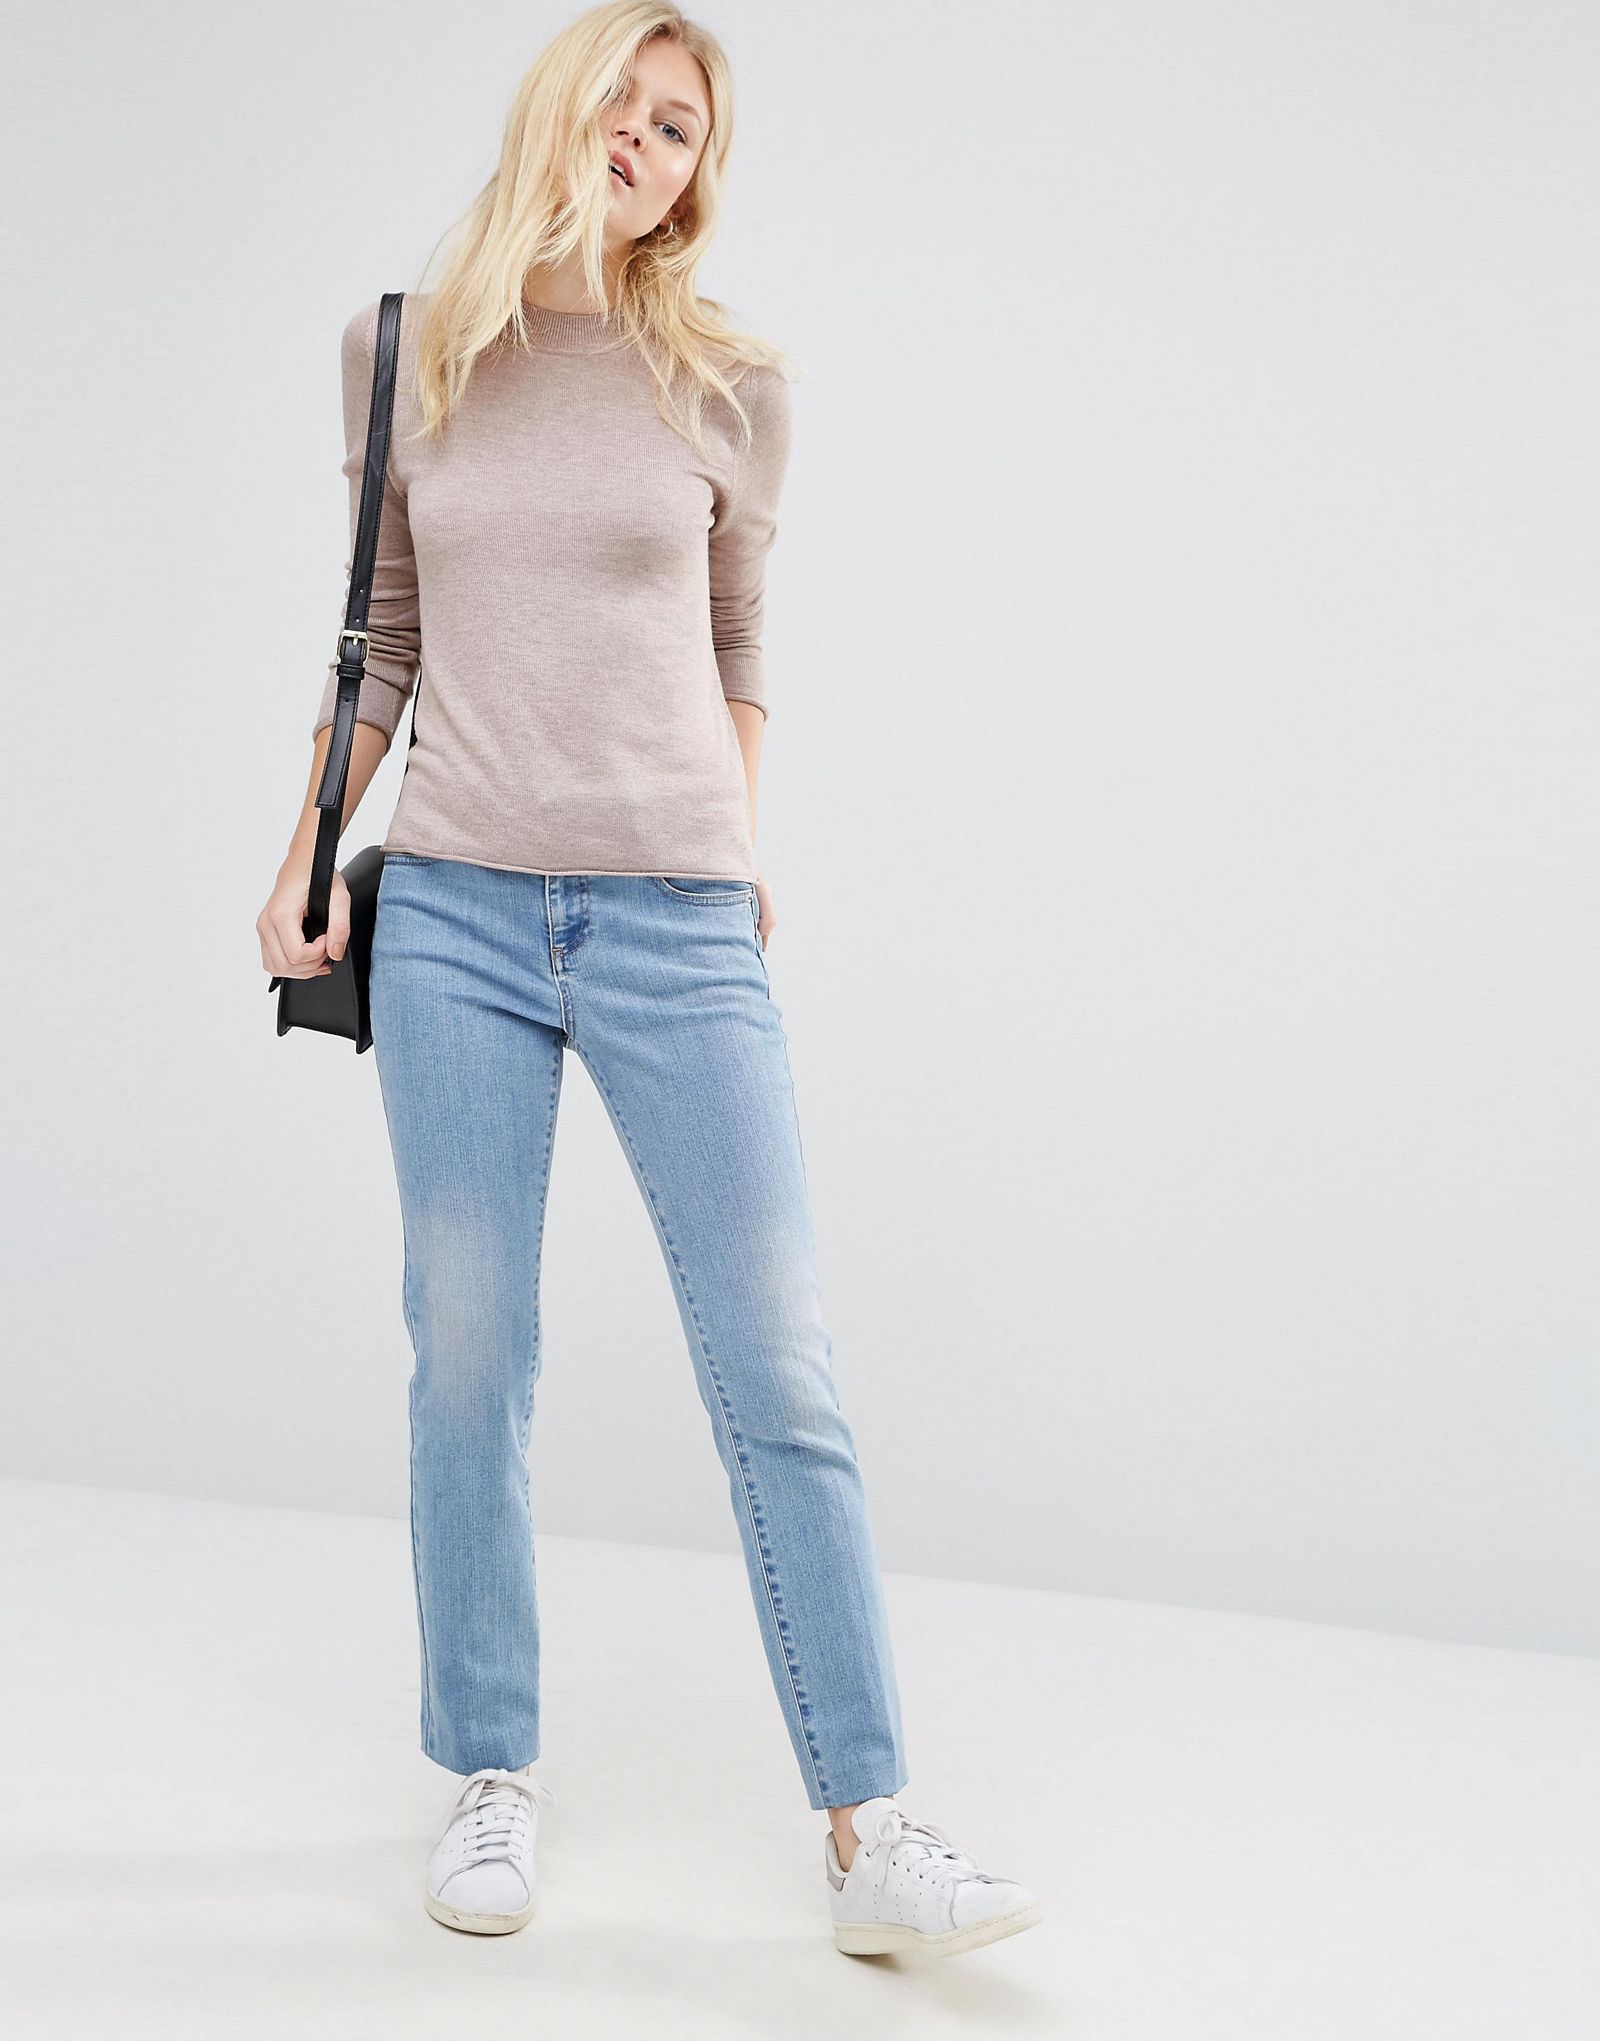 ASOS PETITE Jumper With Crew Neck in Soft Yarn